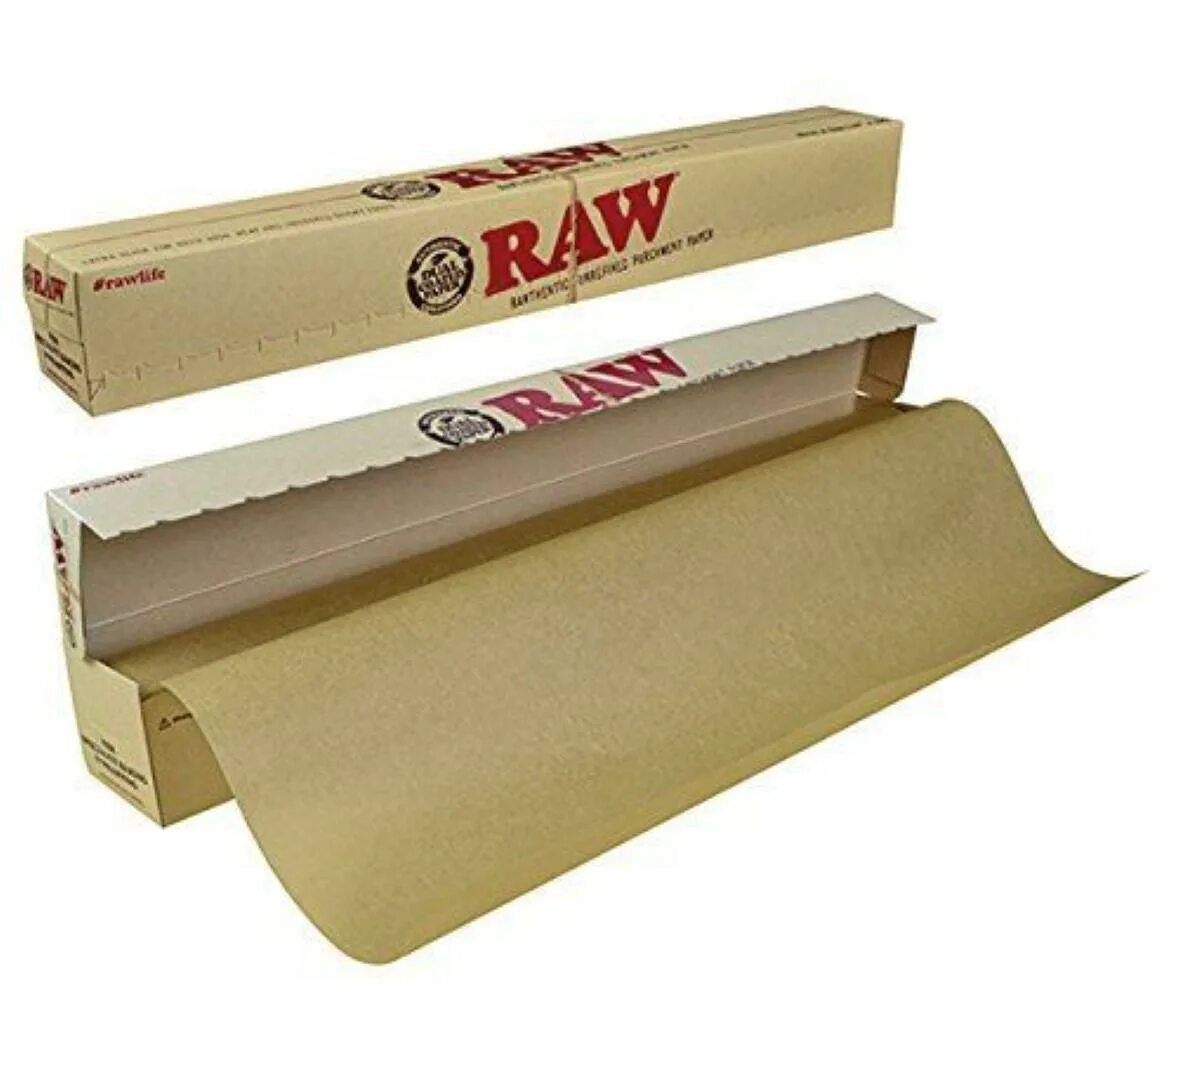 Now roll. Raw бумага. Raw Rolling papers. Raw paper Rolls. Parchment paper for Baking.